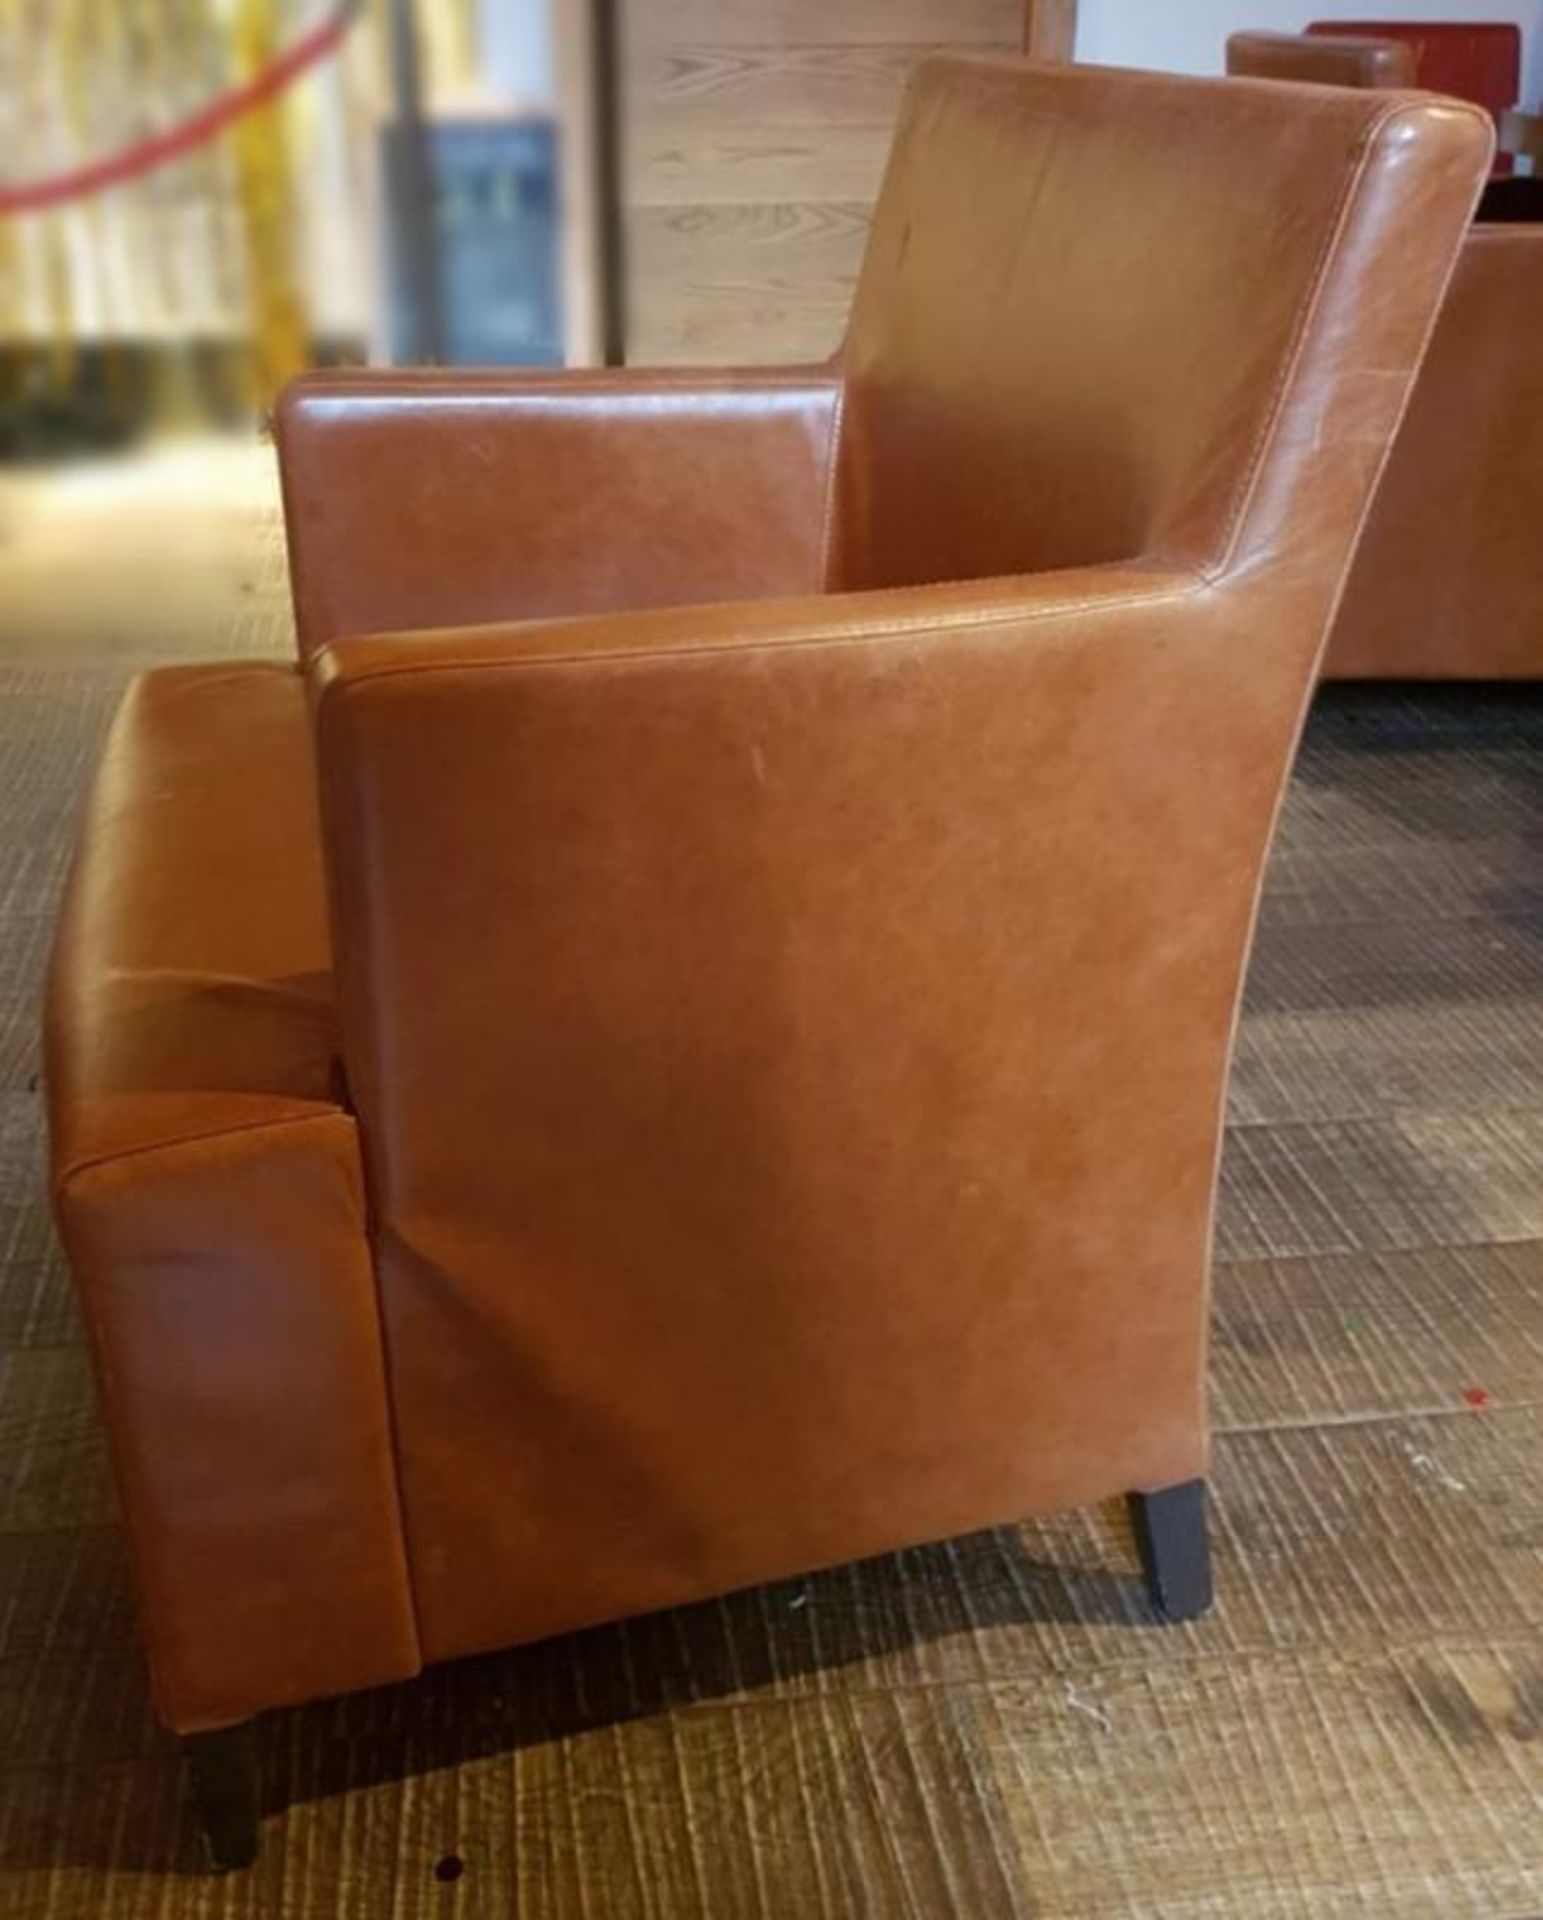 1 x Large Armchair Upholstered In Tan Leather - Recently Removed From A City Centre Steakhouse Resta - Image 5 of 5